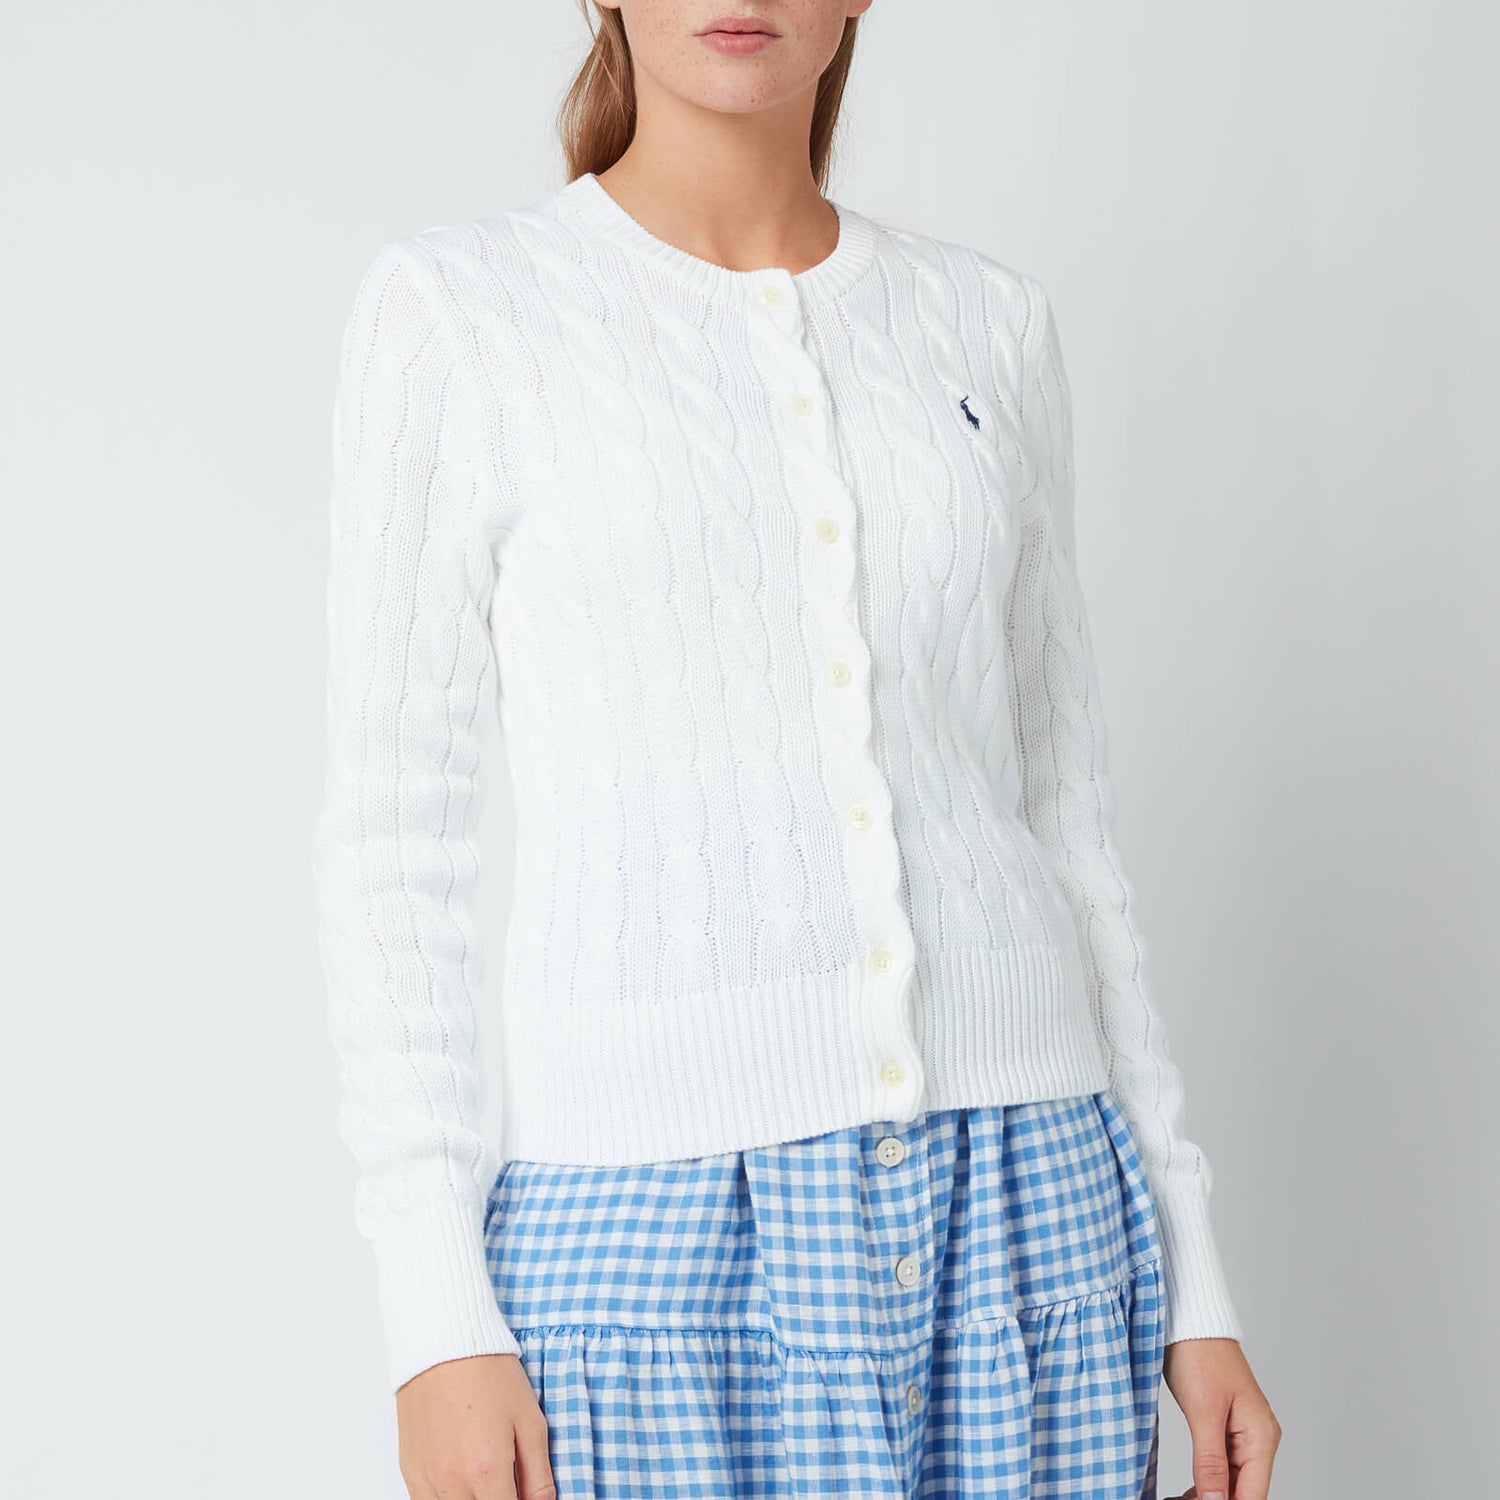 Polo Ralph Lauren Women's Cardigan - White - Free UK Delivery Available